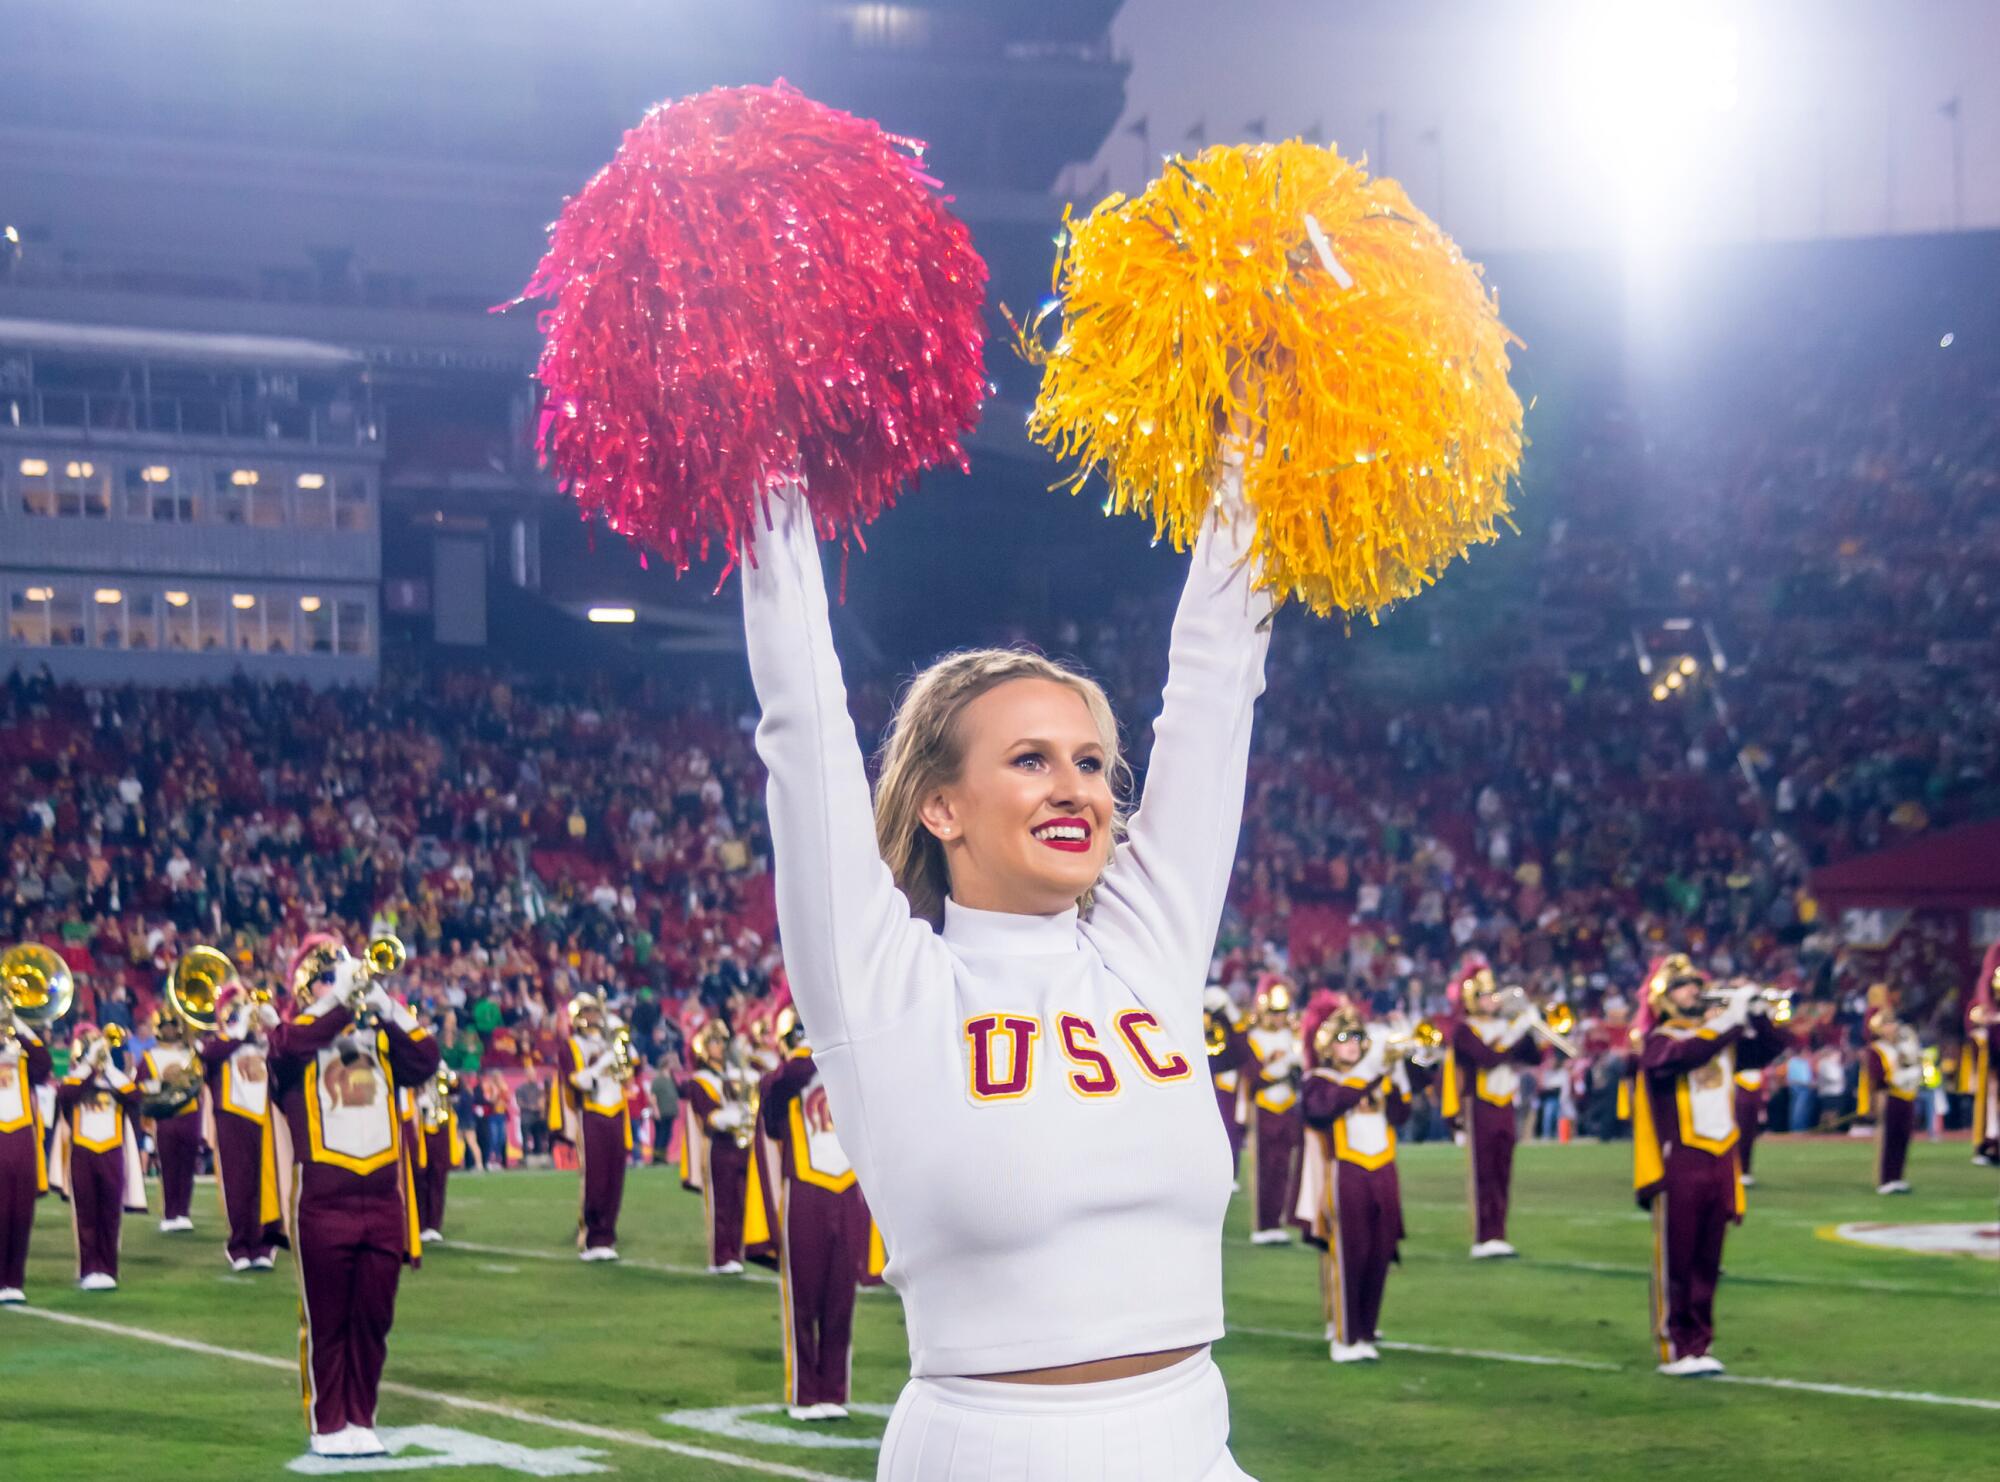 USC Song Girl Josie Bullen performs during a game